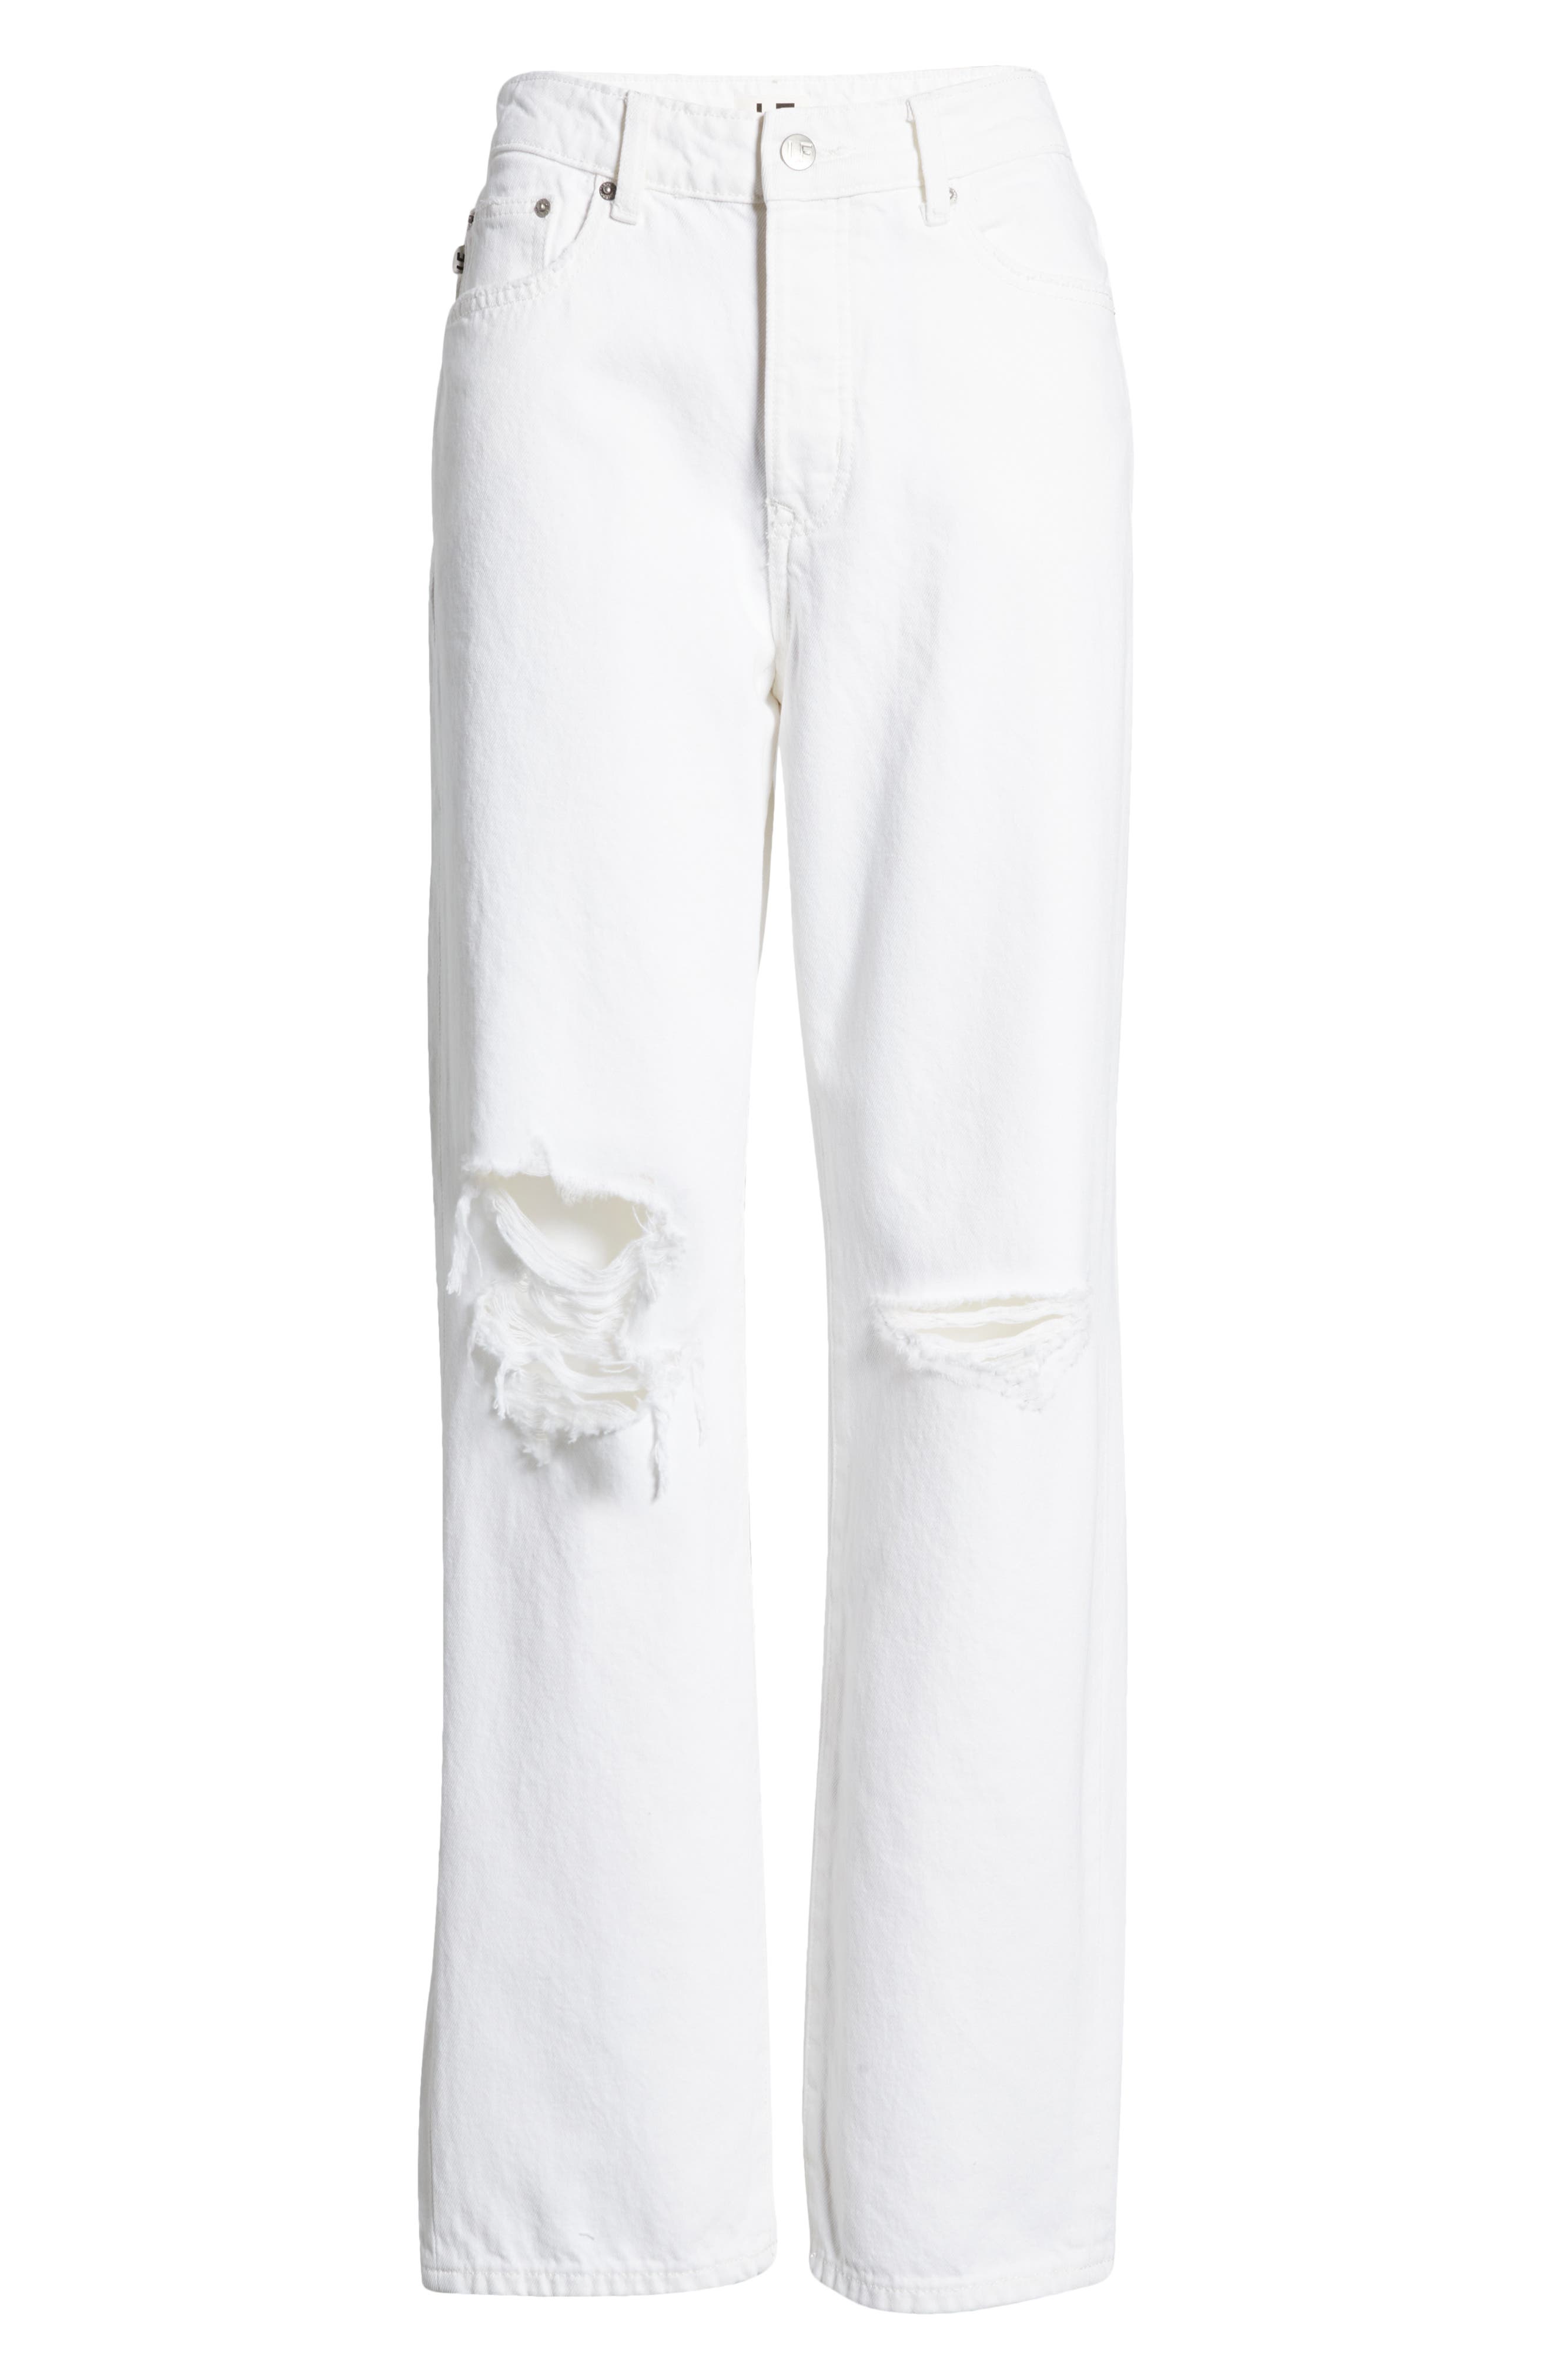 Lovers + Friends Ryan Distressed High Waist Straight Leg Jeans in Lighthouse